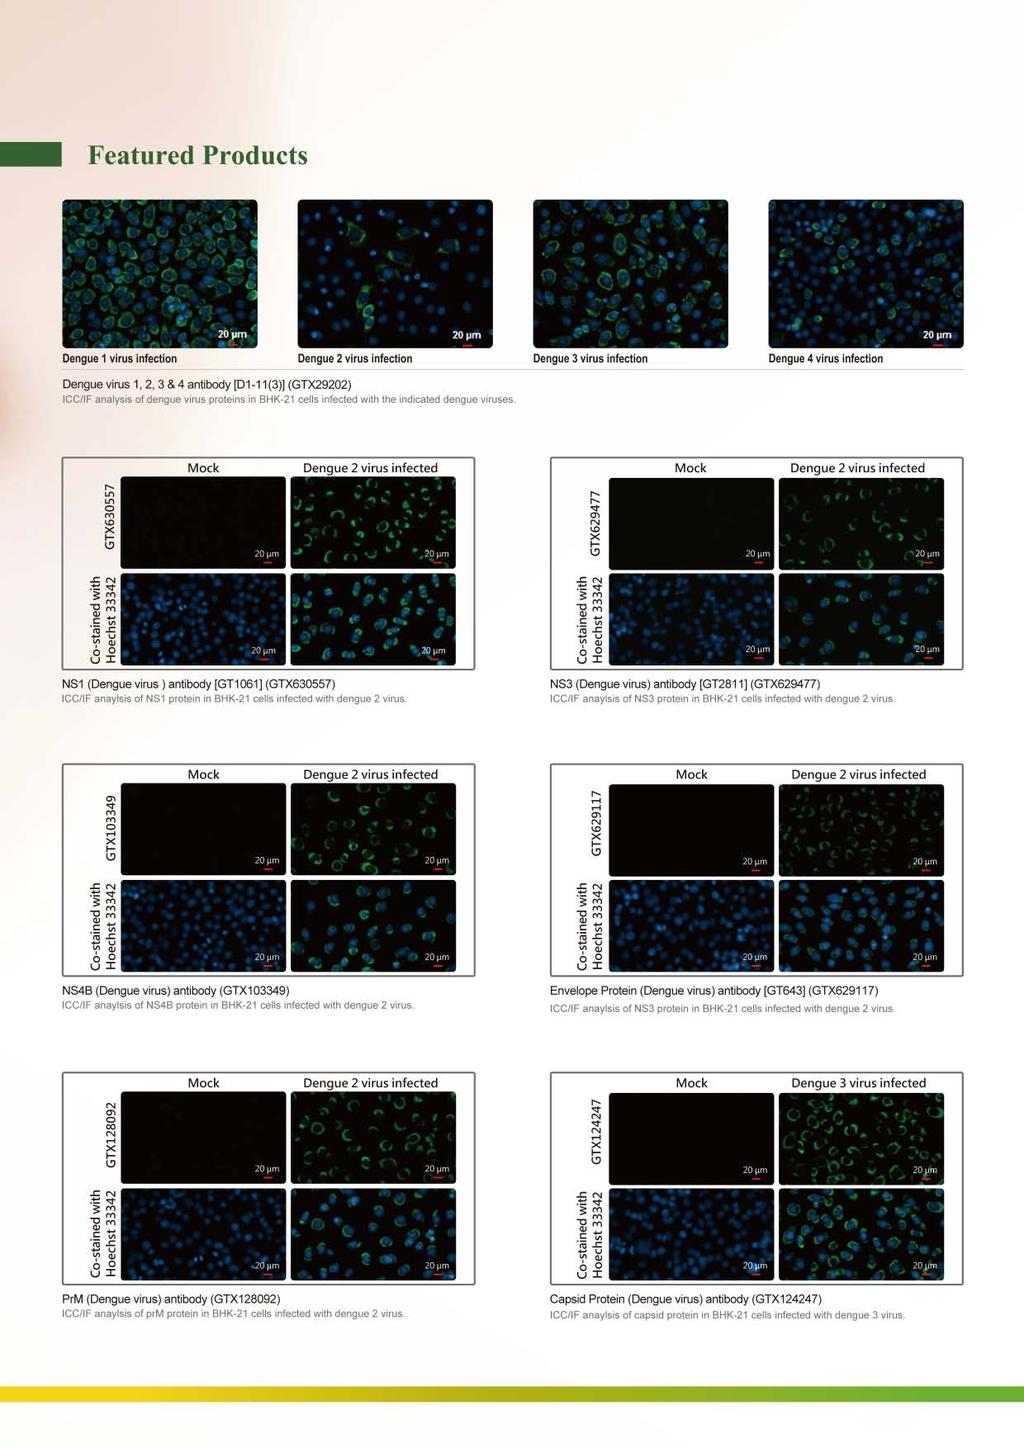 Featured Products Dengue 1 virus Dengue 2 virus Dengue 3 virus Dengue 4 virus Dengue virus 1, 2, 3 &4 antibody [01-11(3)] (GTX29202) CC/F analysis of dengue virus proteins in BHK-21 cells infected